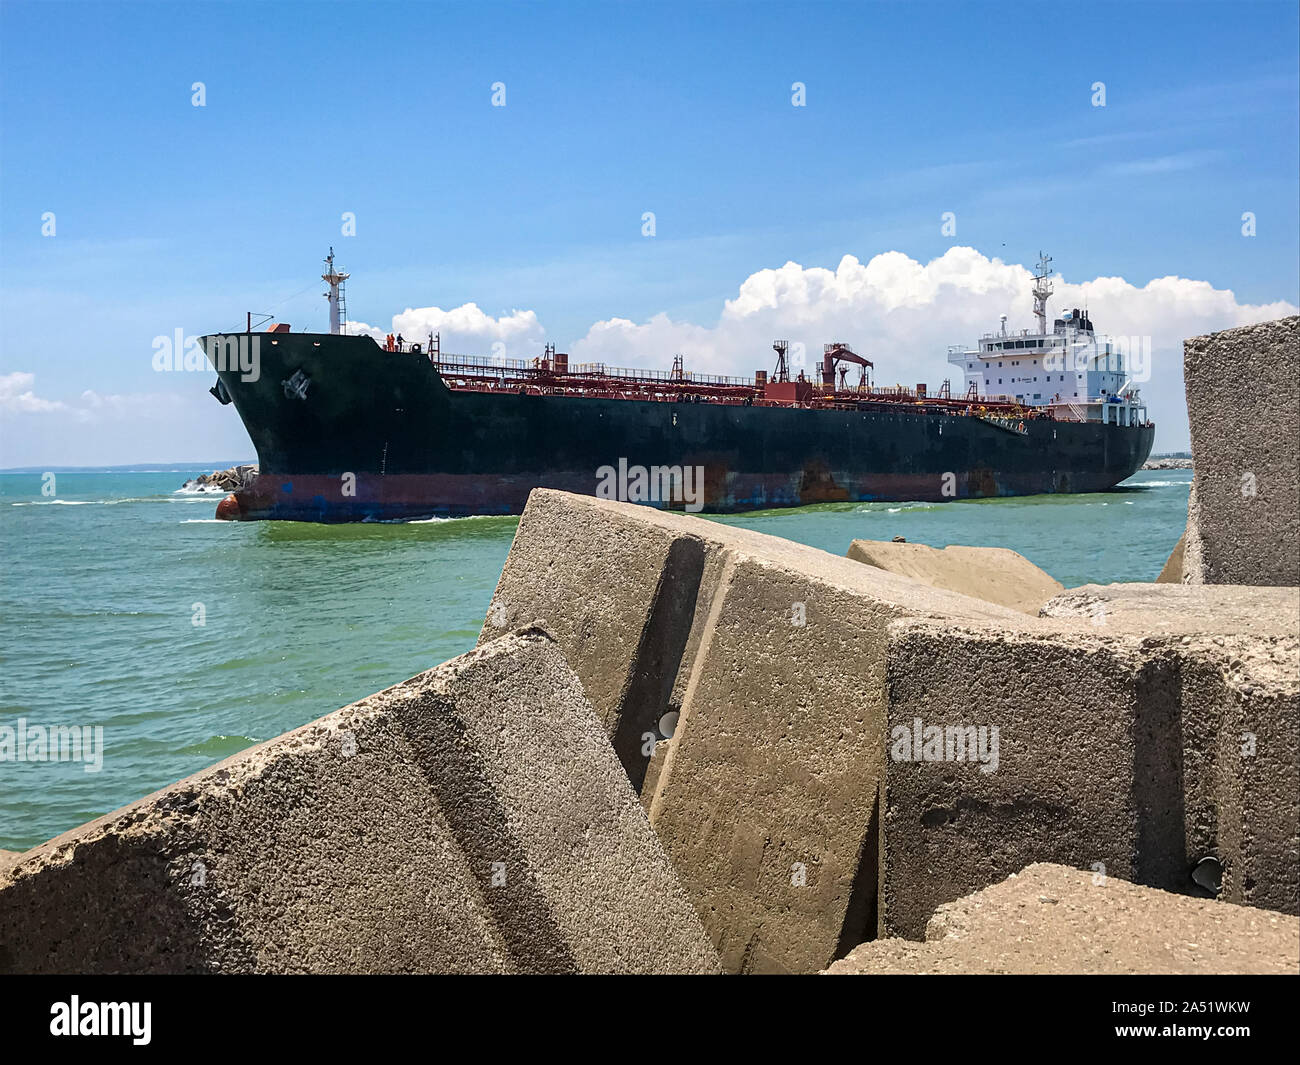 Merchant ship used to transport crude oil to the refinery in Mexico. Stock Photo